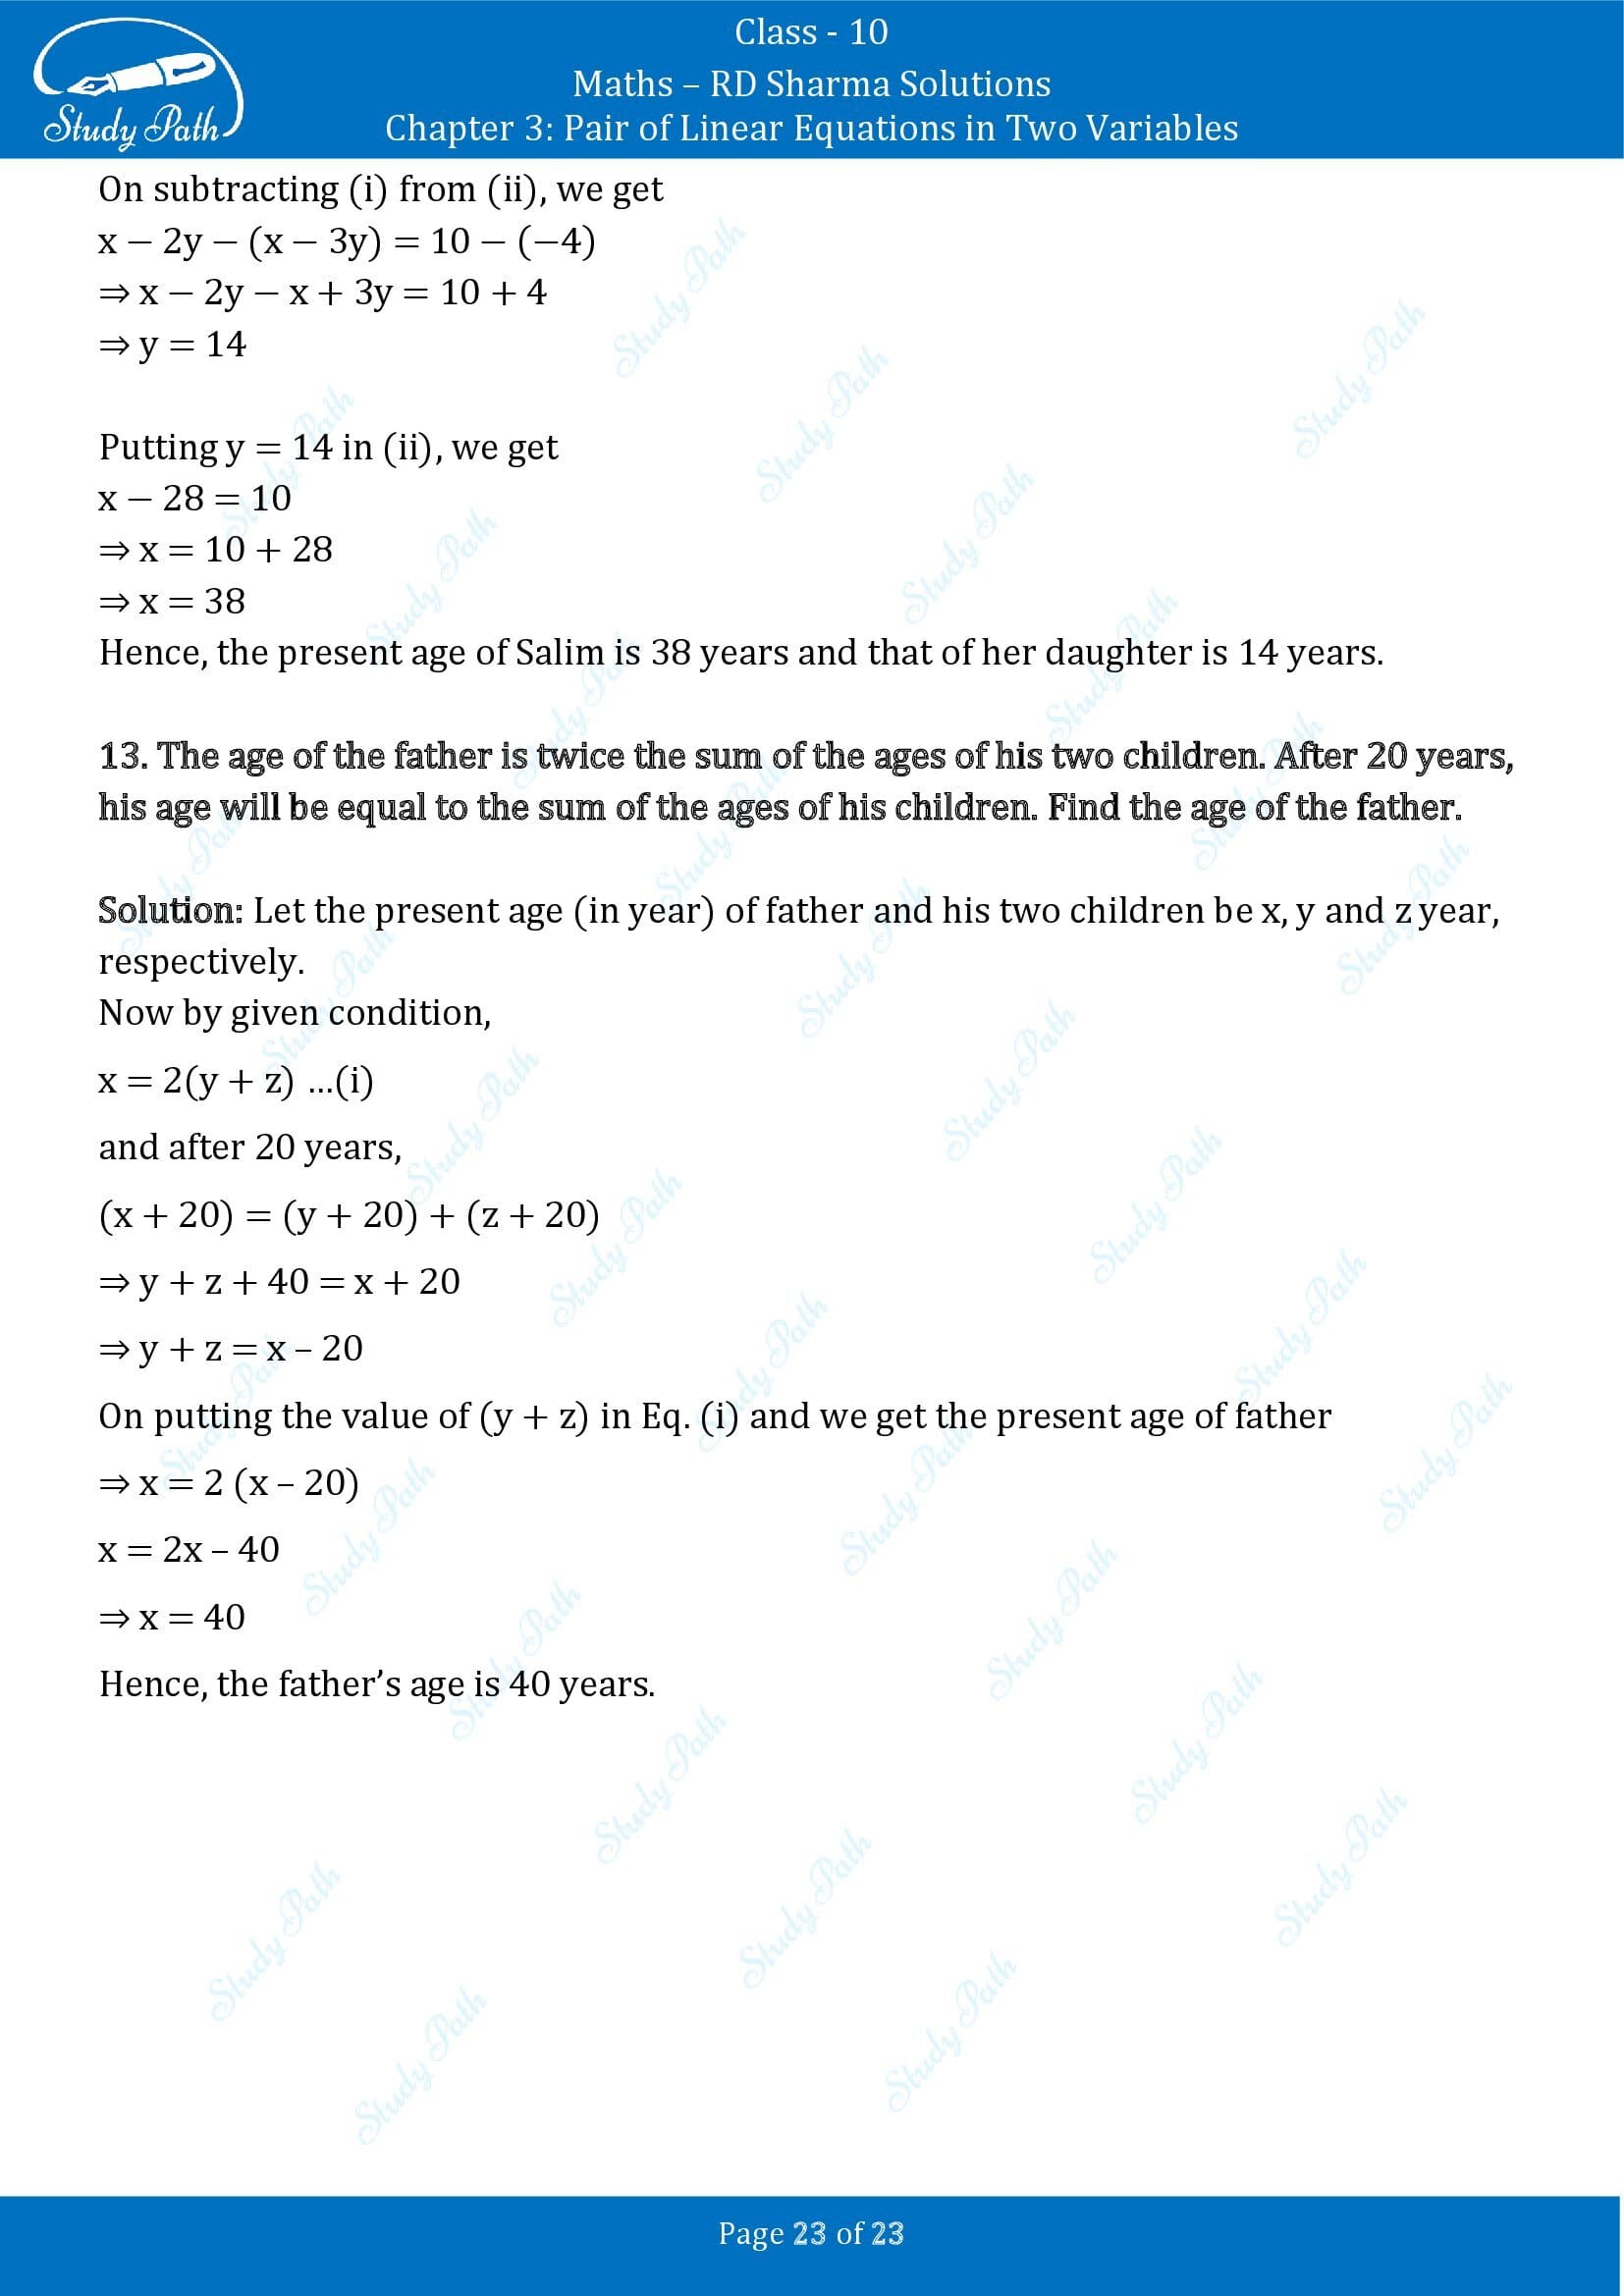 RD Sharma Solutions Class 10 Chapter 3 Pair of Linear Equations in Two Variables Exercise 3.8 00023